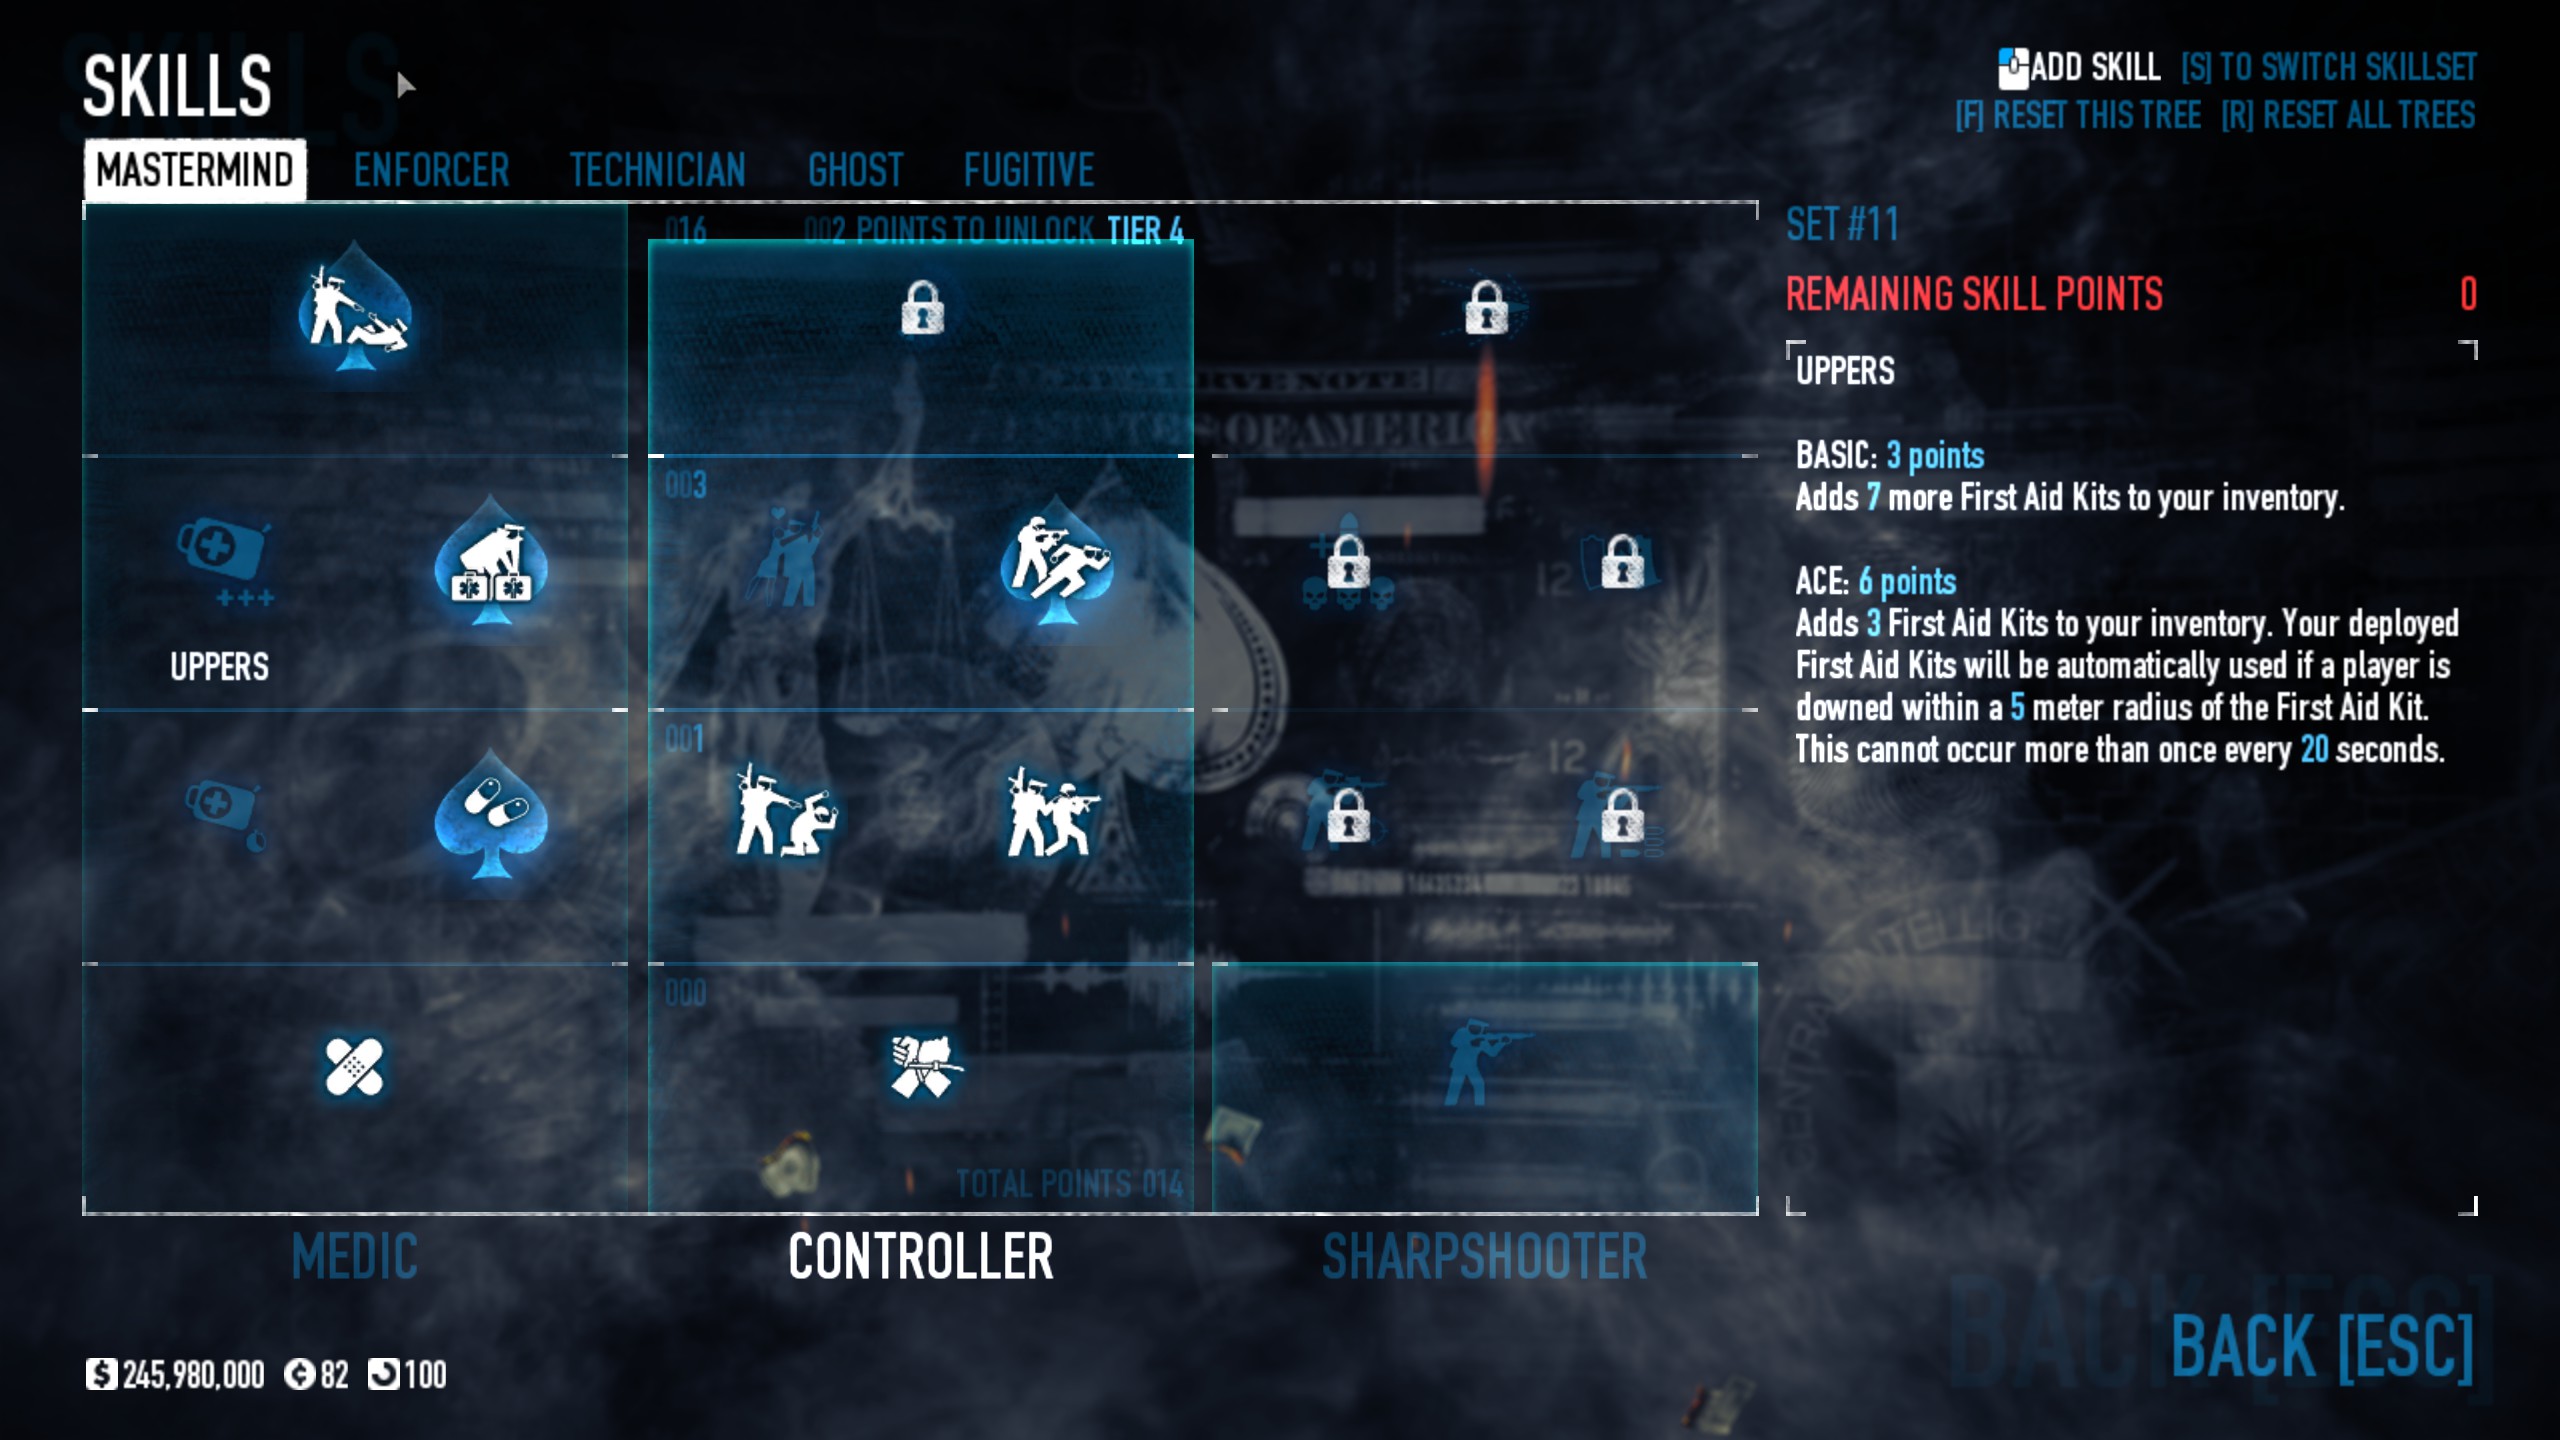 PAYDAY 2 Best SMG Build for Anarchist - -Skills, Chapter One- - 4DB71E4